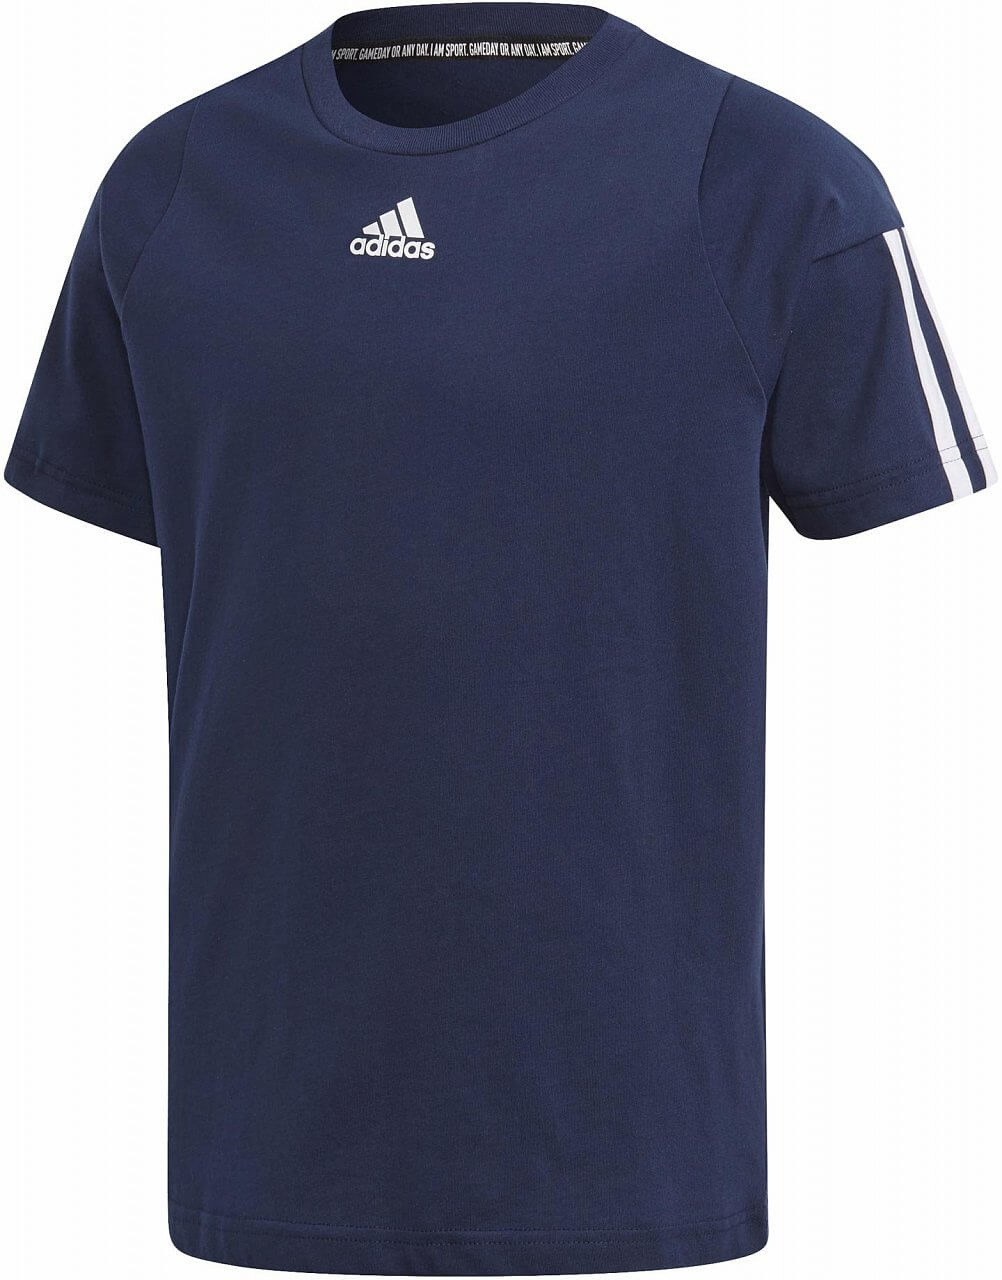 Magliette adidas Youth Boys Must Haves 3S Tee